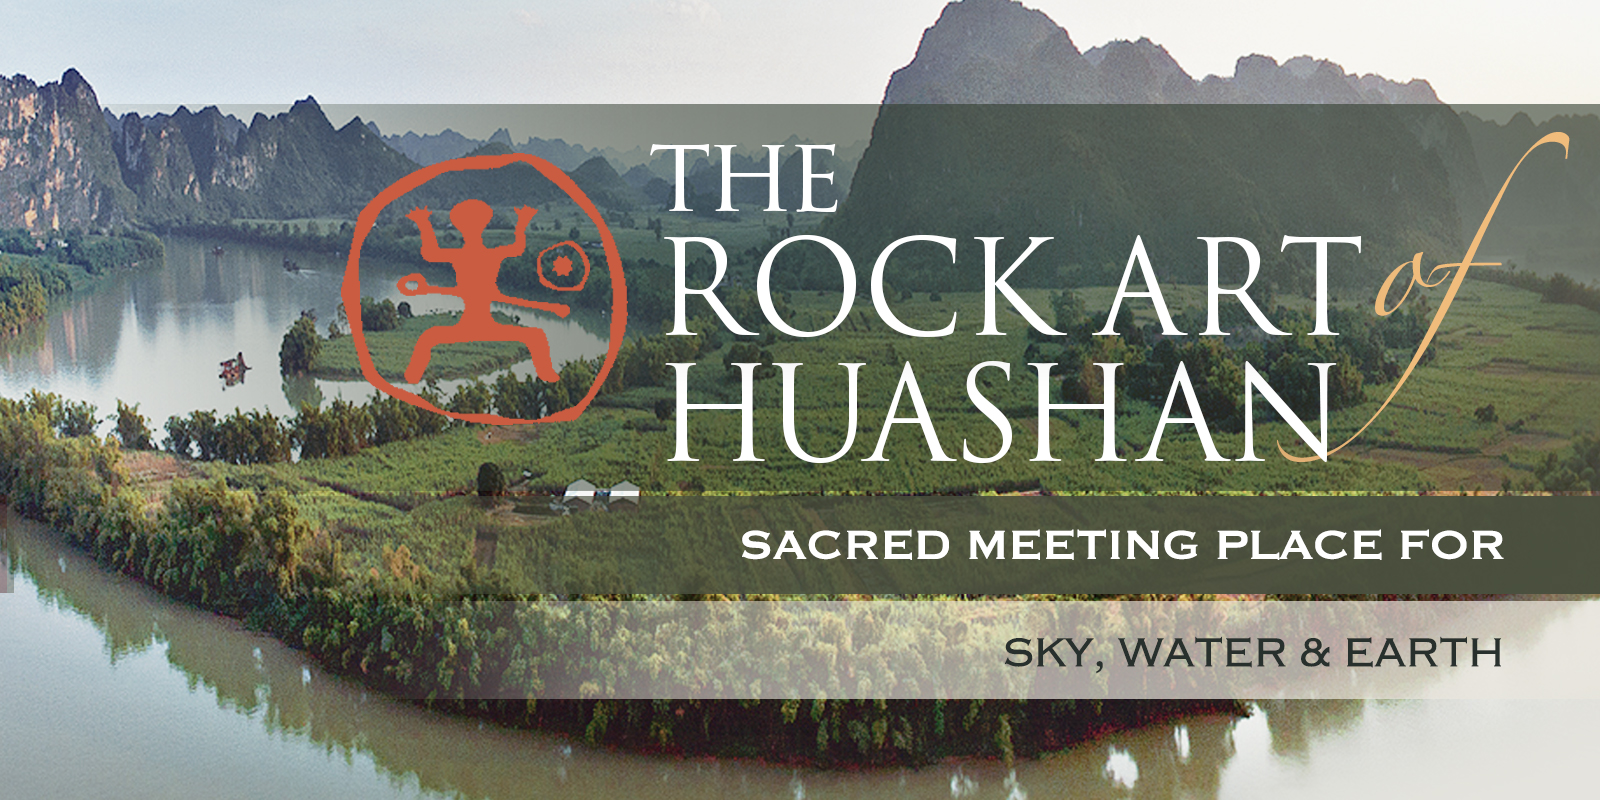 Zuojiang Huashan Rock Art Site China Archaeology Sacred Meeting Place for Sky, Water & Earth